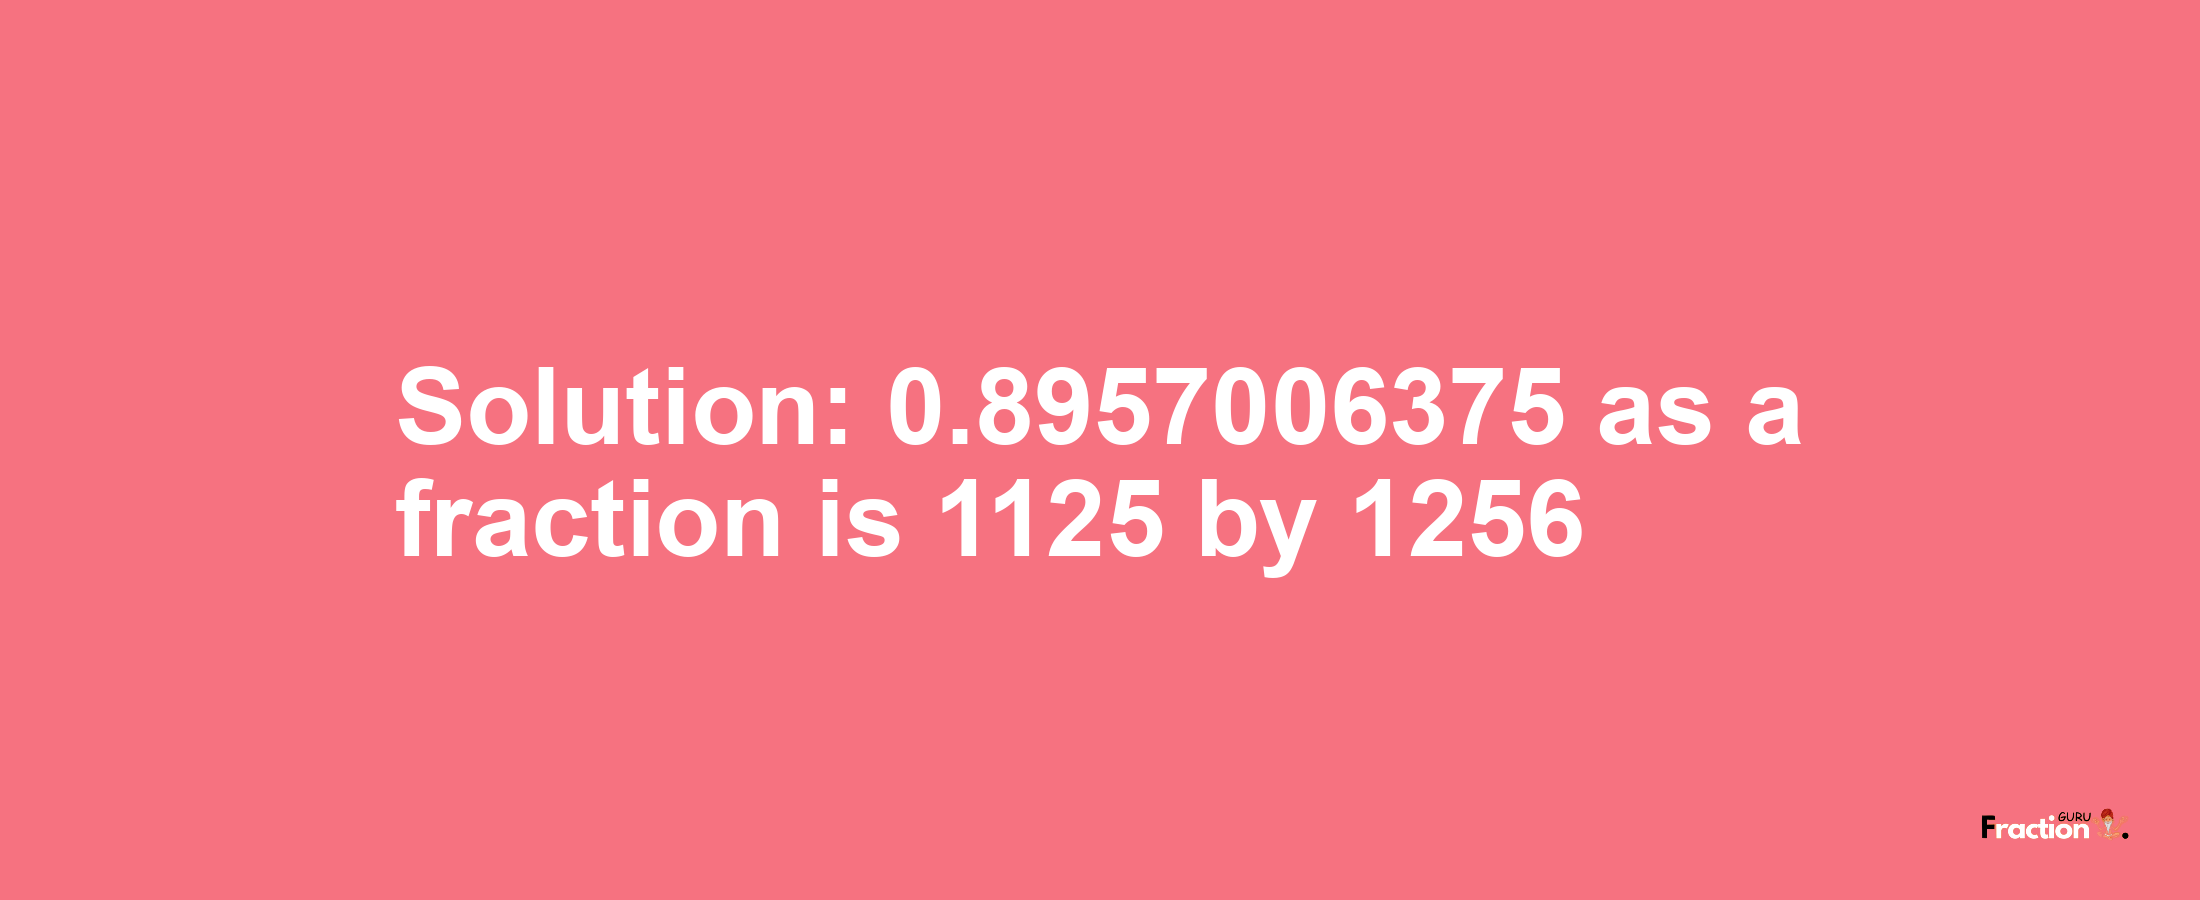 Solution:0.8957006375 as a fraction is 1125/1256